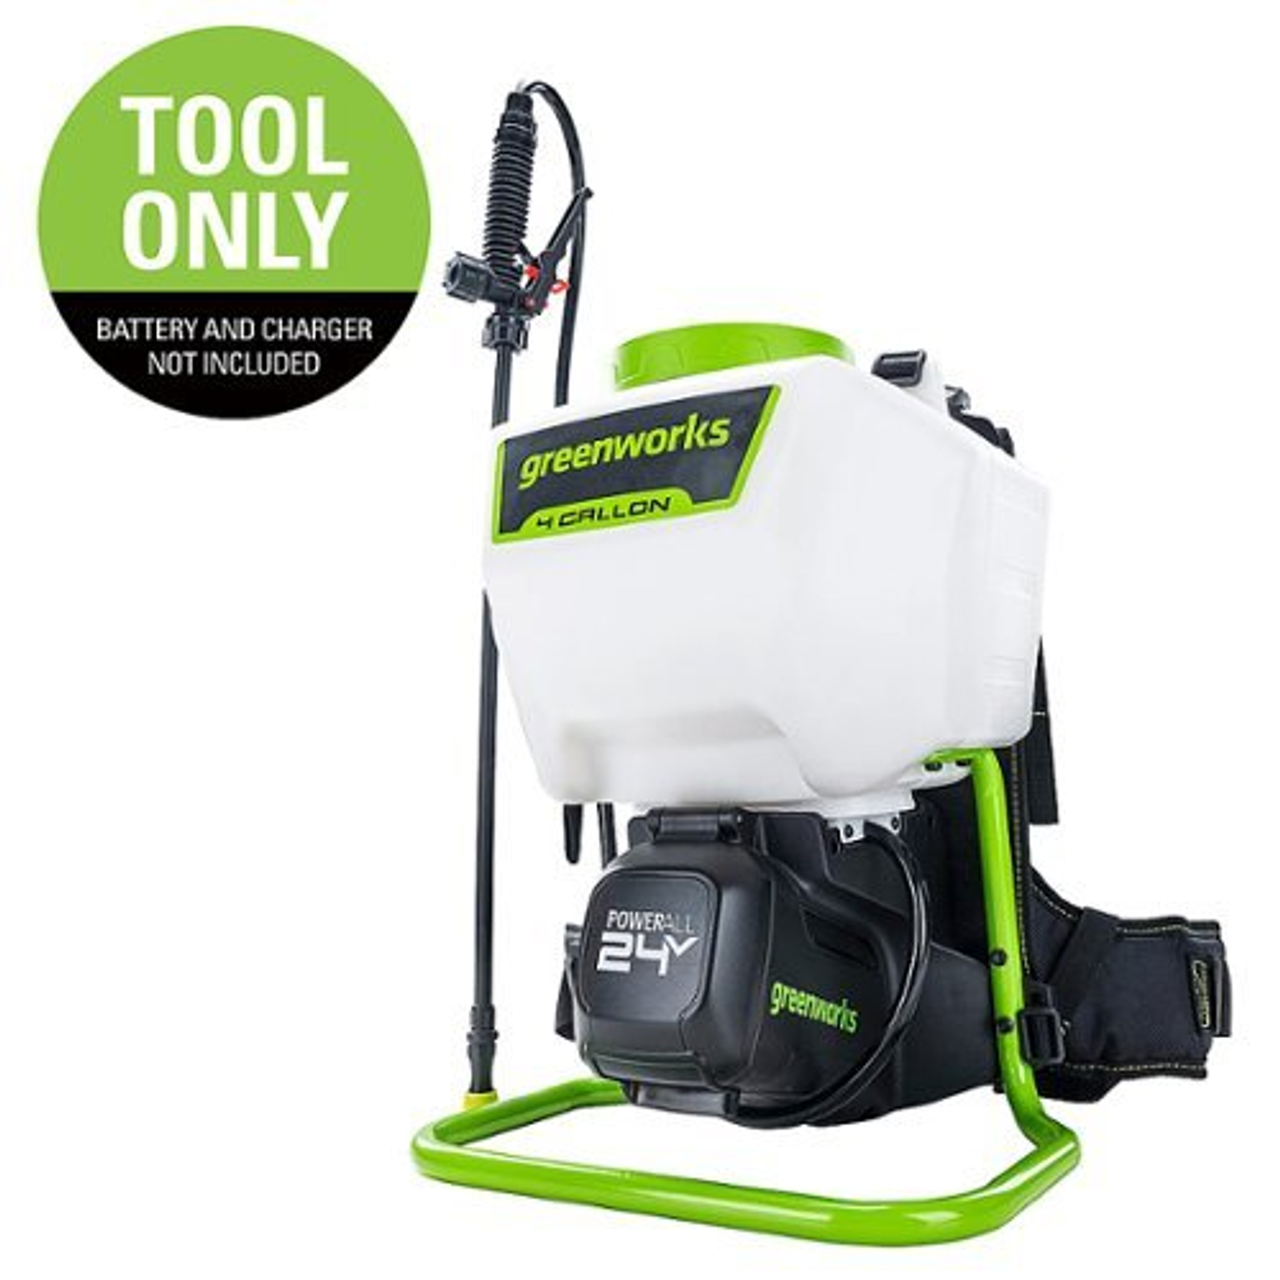 Greenworks - 24 Volt Backpack Sprayer with (1) 2 Ah Battery and Charger - Green